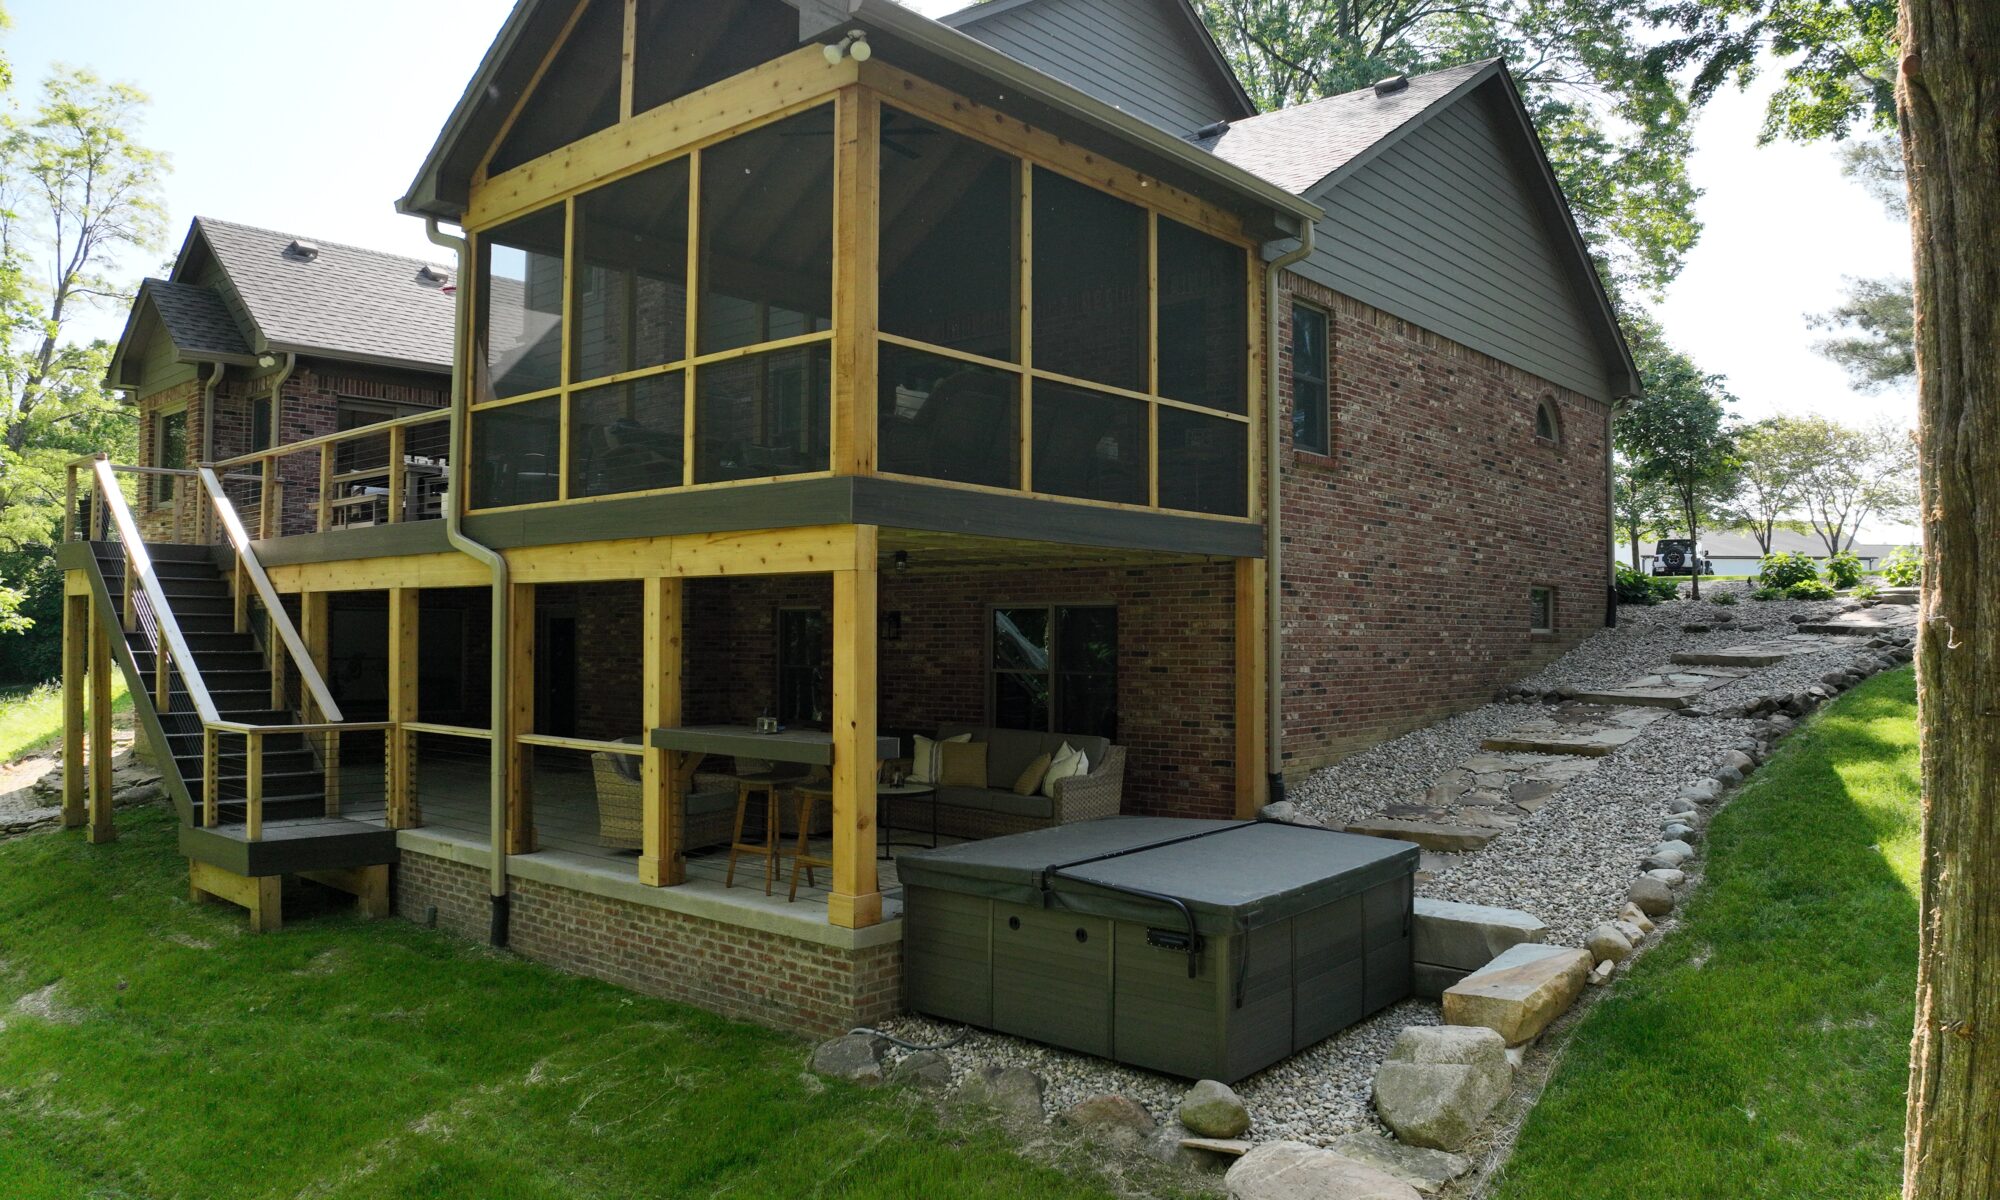 precision outdoors Bargersville elevated Exterior backyard remodel Trex composite decking concrete patio hot tub backyard goals dream backyard screened in porch outdoor living space dining area indiana exterior design relaxing outdoors tongue and groove ceiling modern cable railing custom rock landscaping walkway